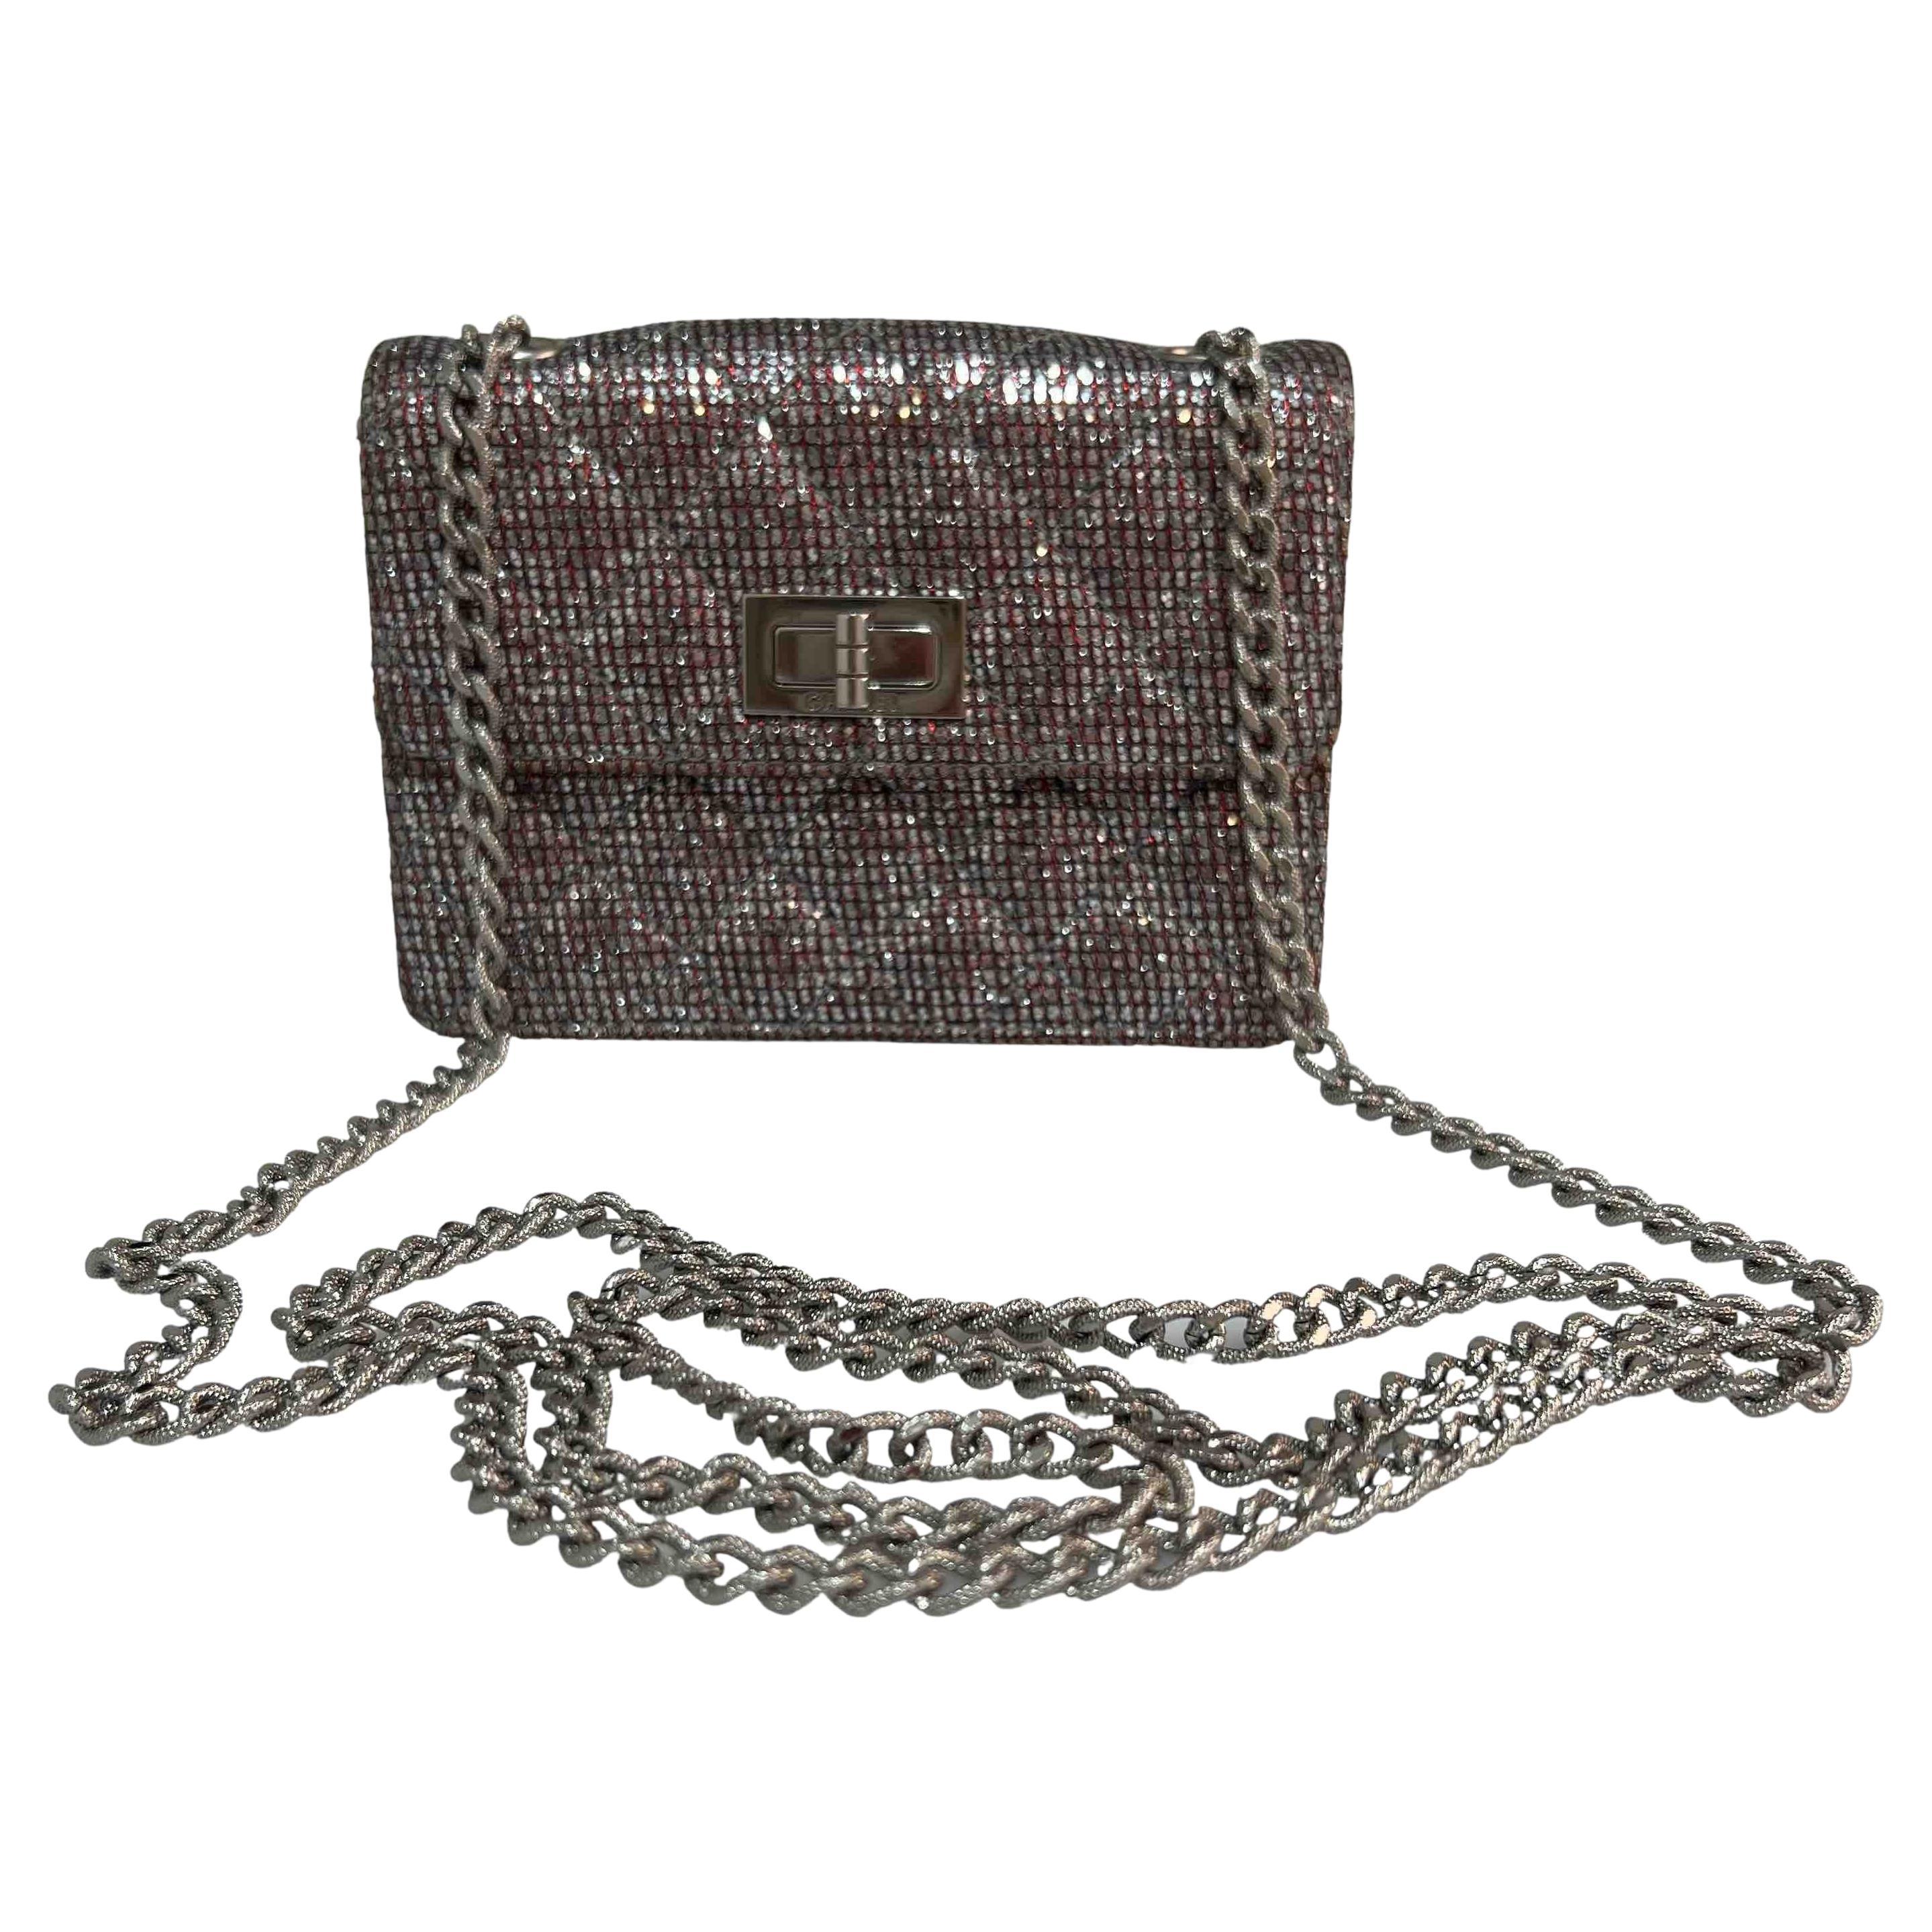 CHANEL Mini 255 Bag in Pink and Silver Rhinestones